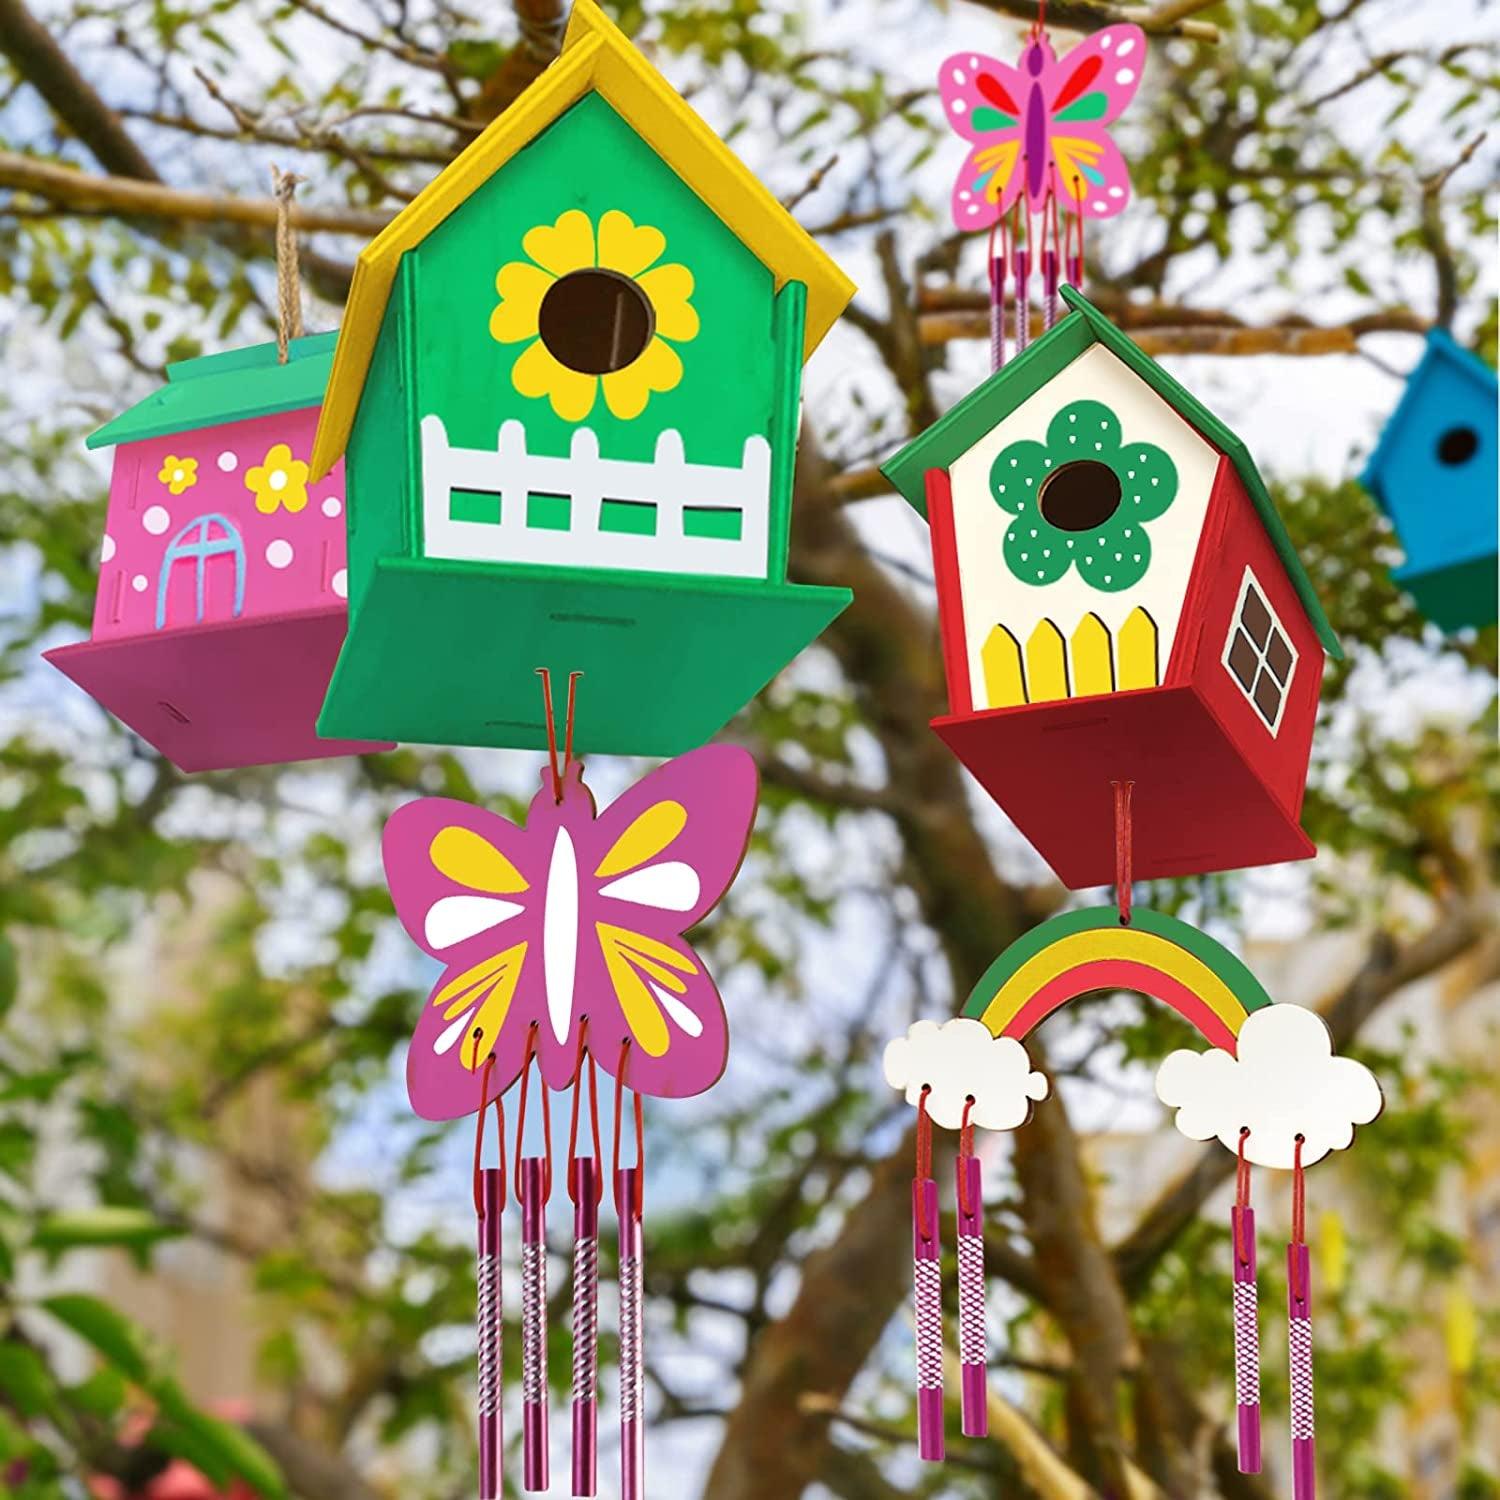 4 Pack DIY Bird House Wind Chime Kit - Build and Paint Birdhouses Wooden Arts Kits - WoodArtSupply